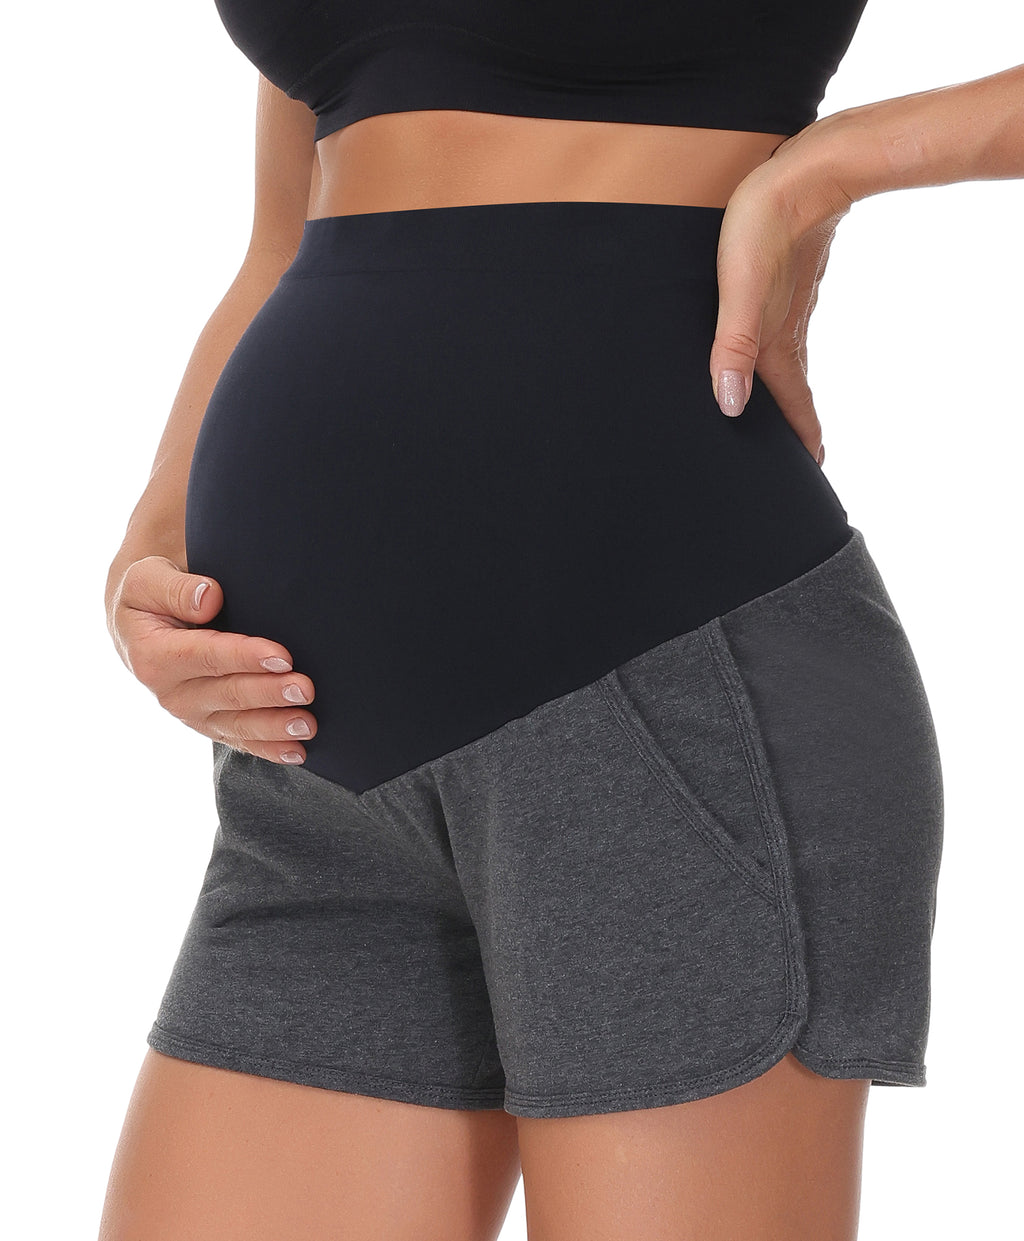 MCA Store - HOFISH Women's Over The Belly Pregnancy Support Breathable  Maternity Shorts